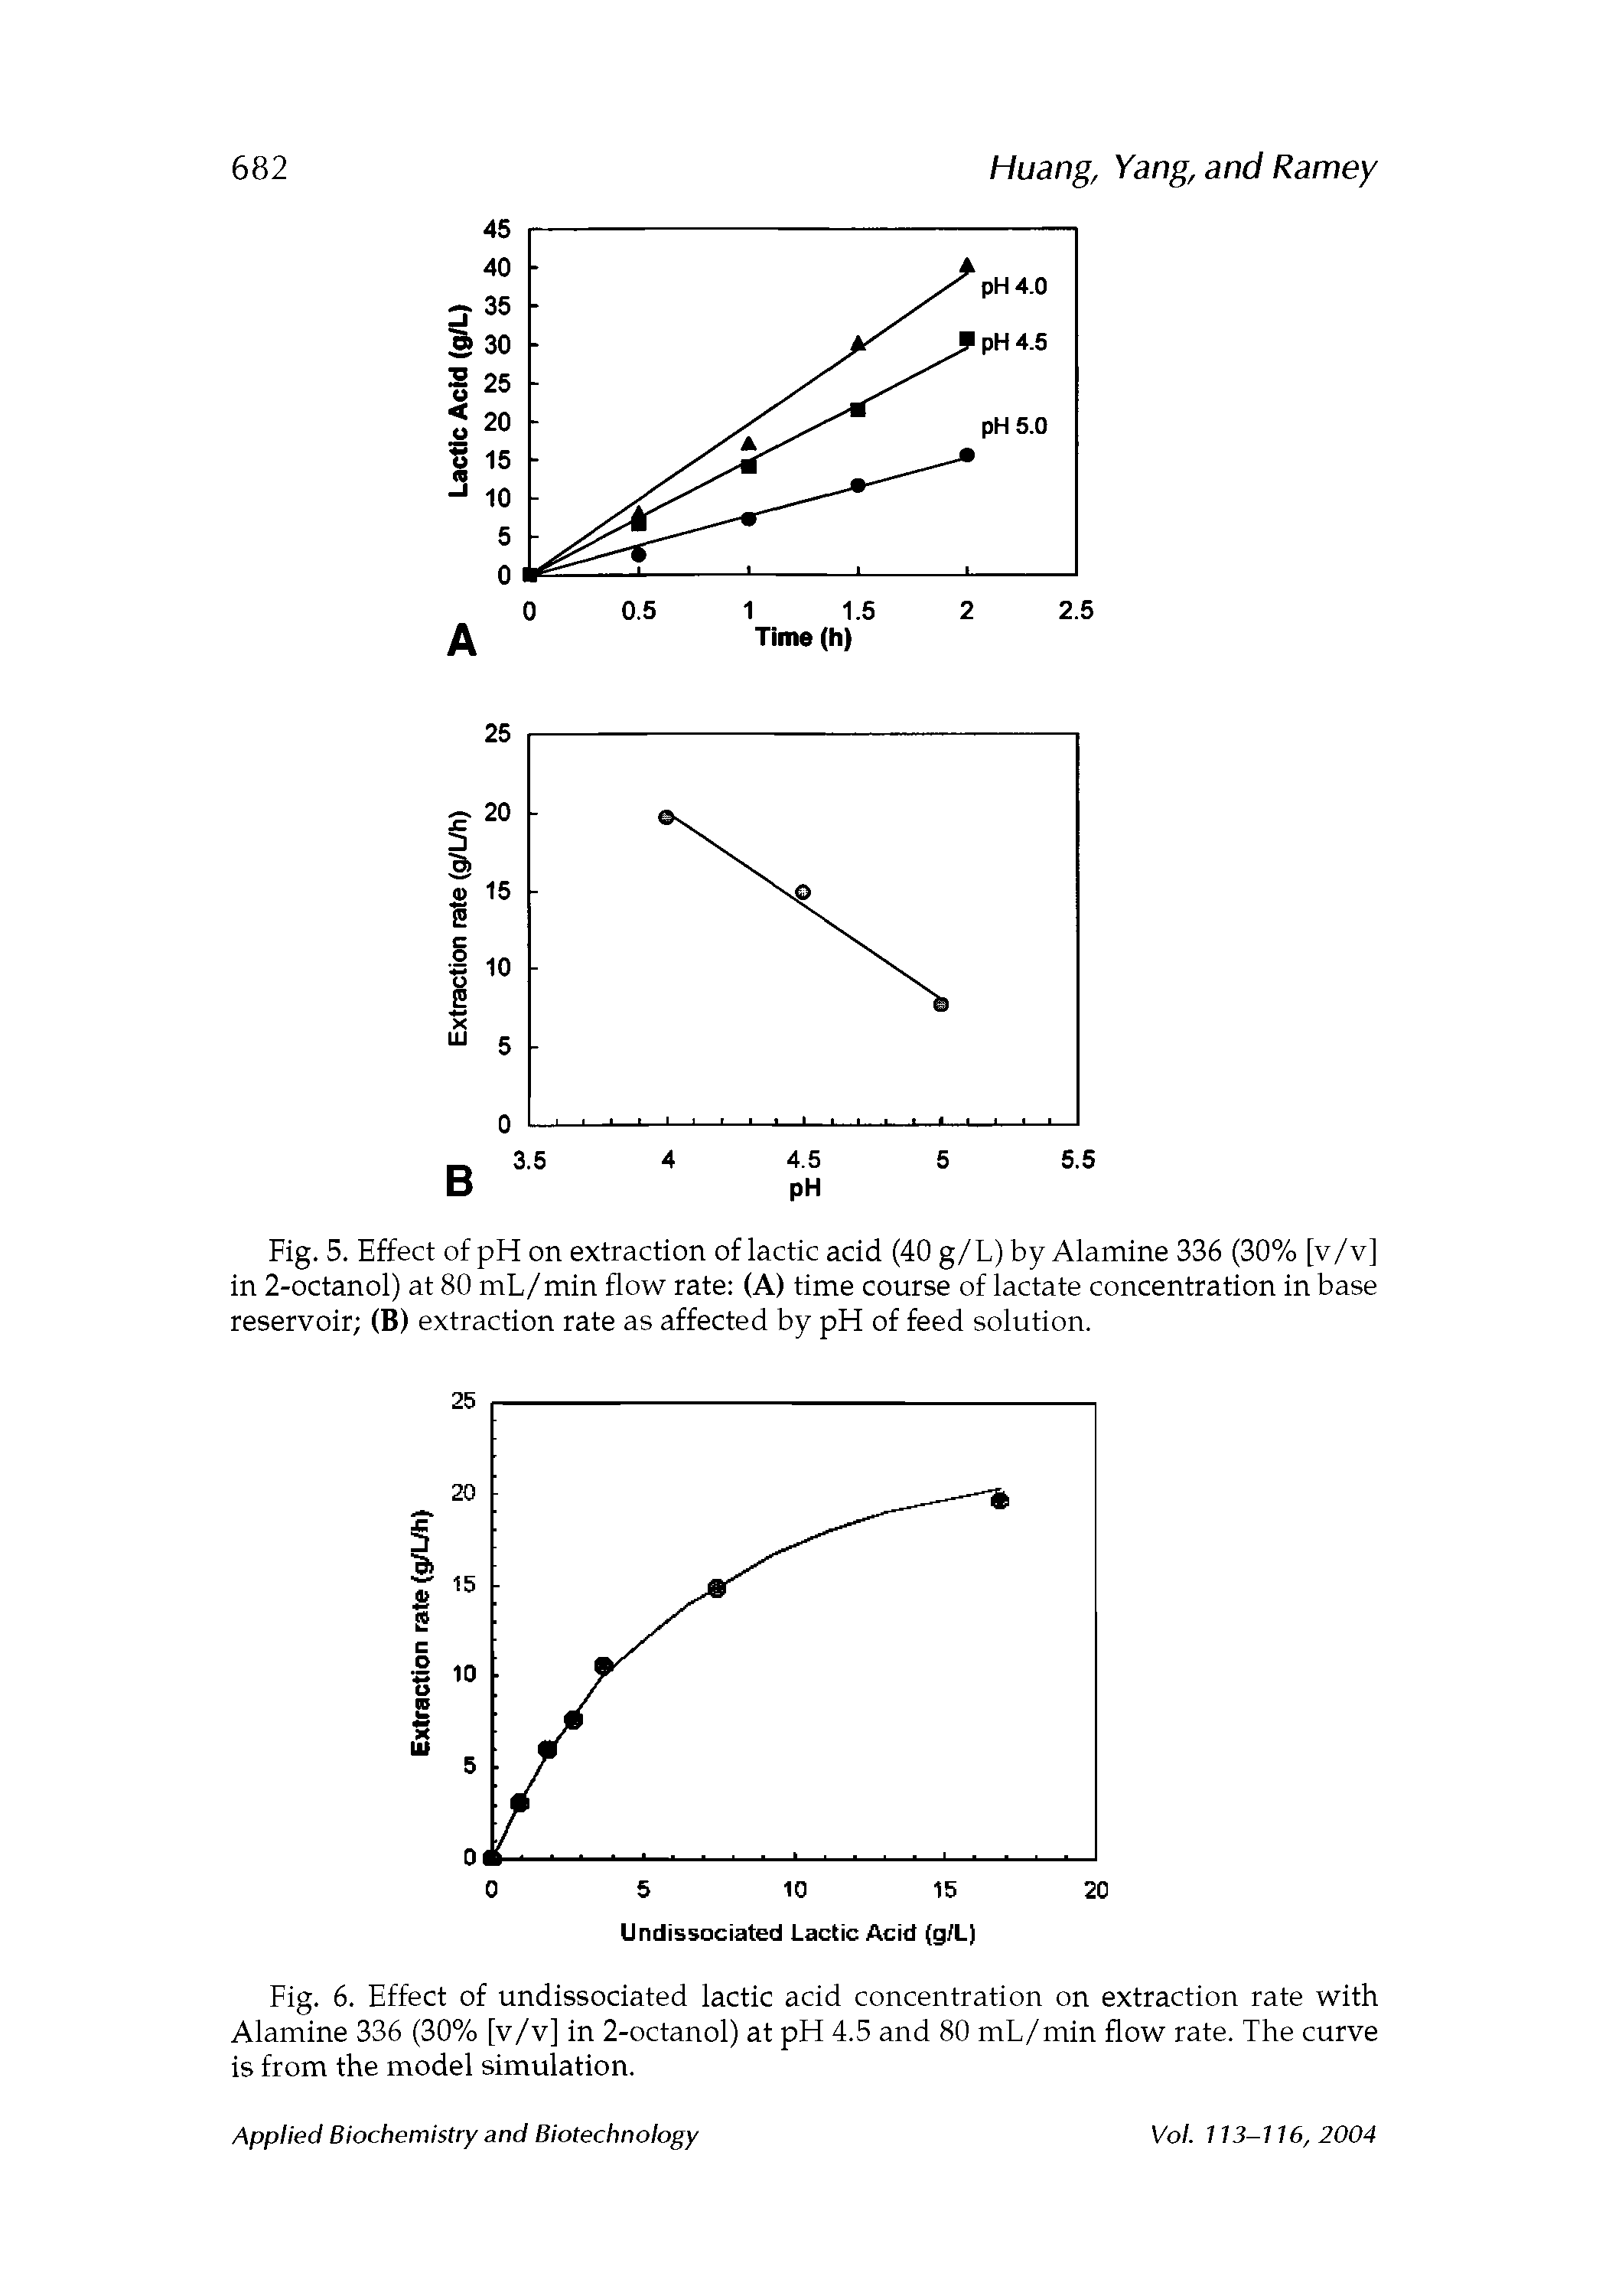 Fig. 6. Effect of undissociated lactic acid concentration on extraction rate with Alamine 336 (30% [v/v] in 2-octanol) at pH 4.5 and 80 mL/min flow rate. The curve is from the model simulation.